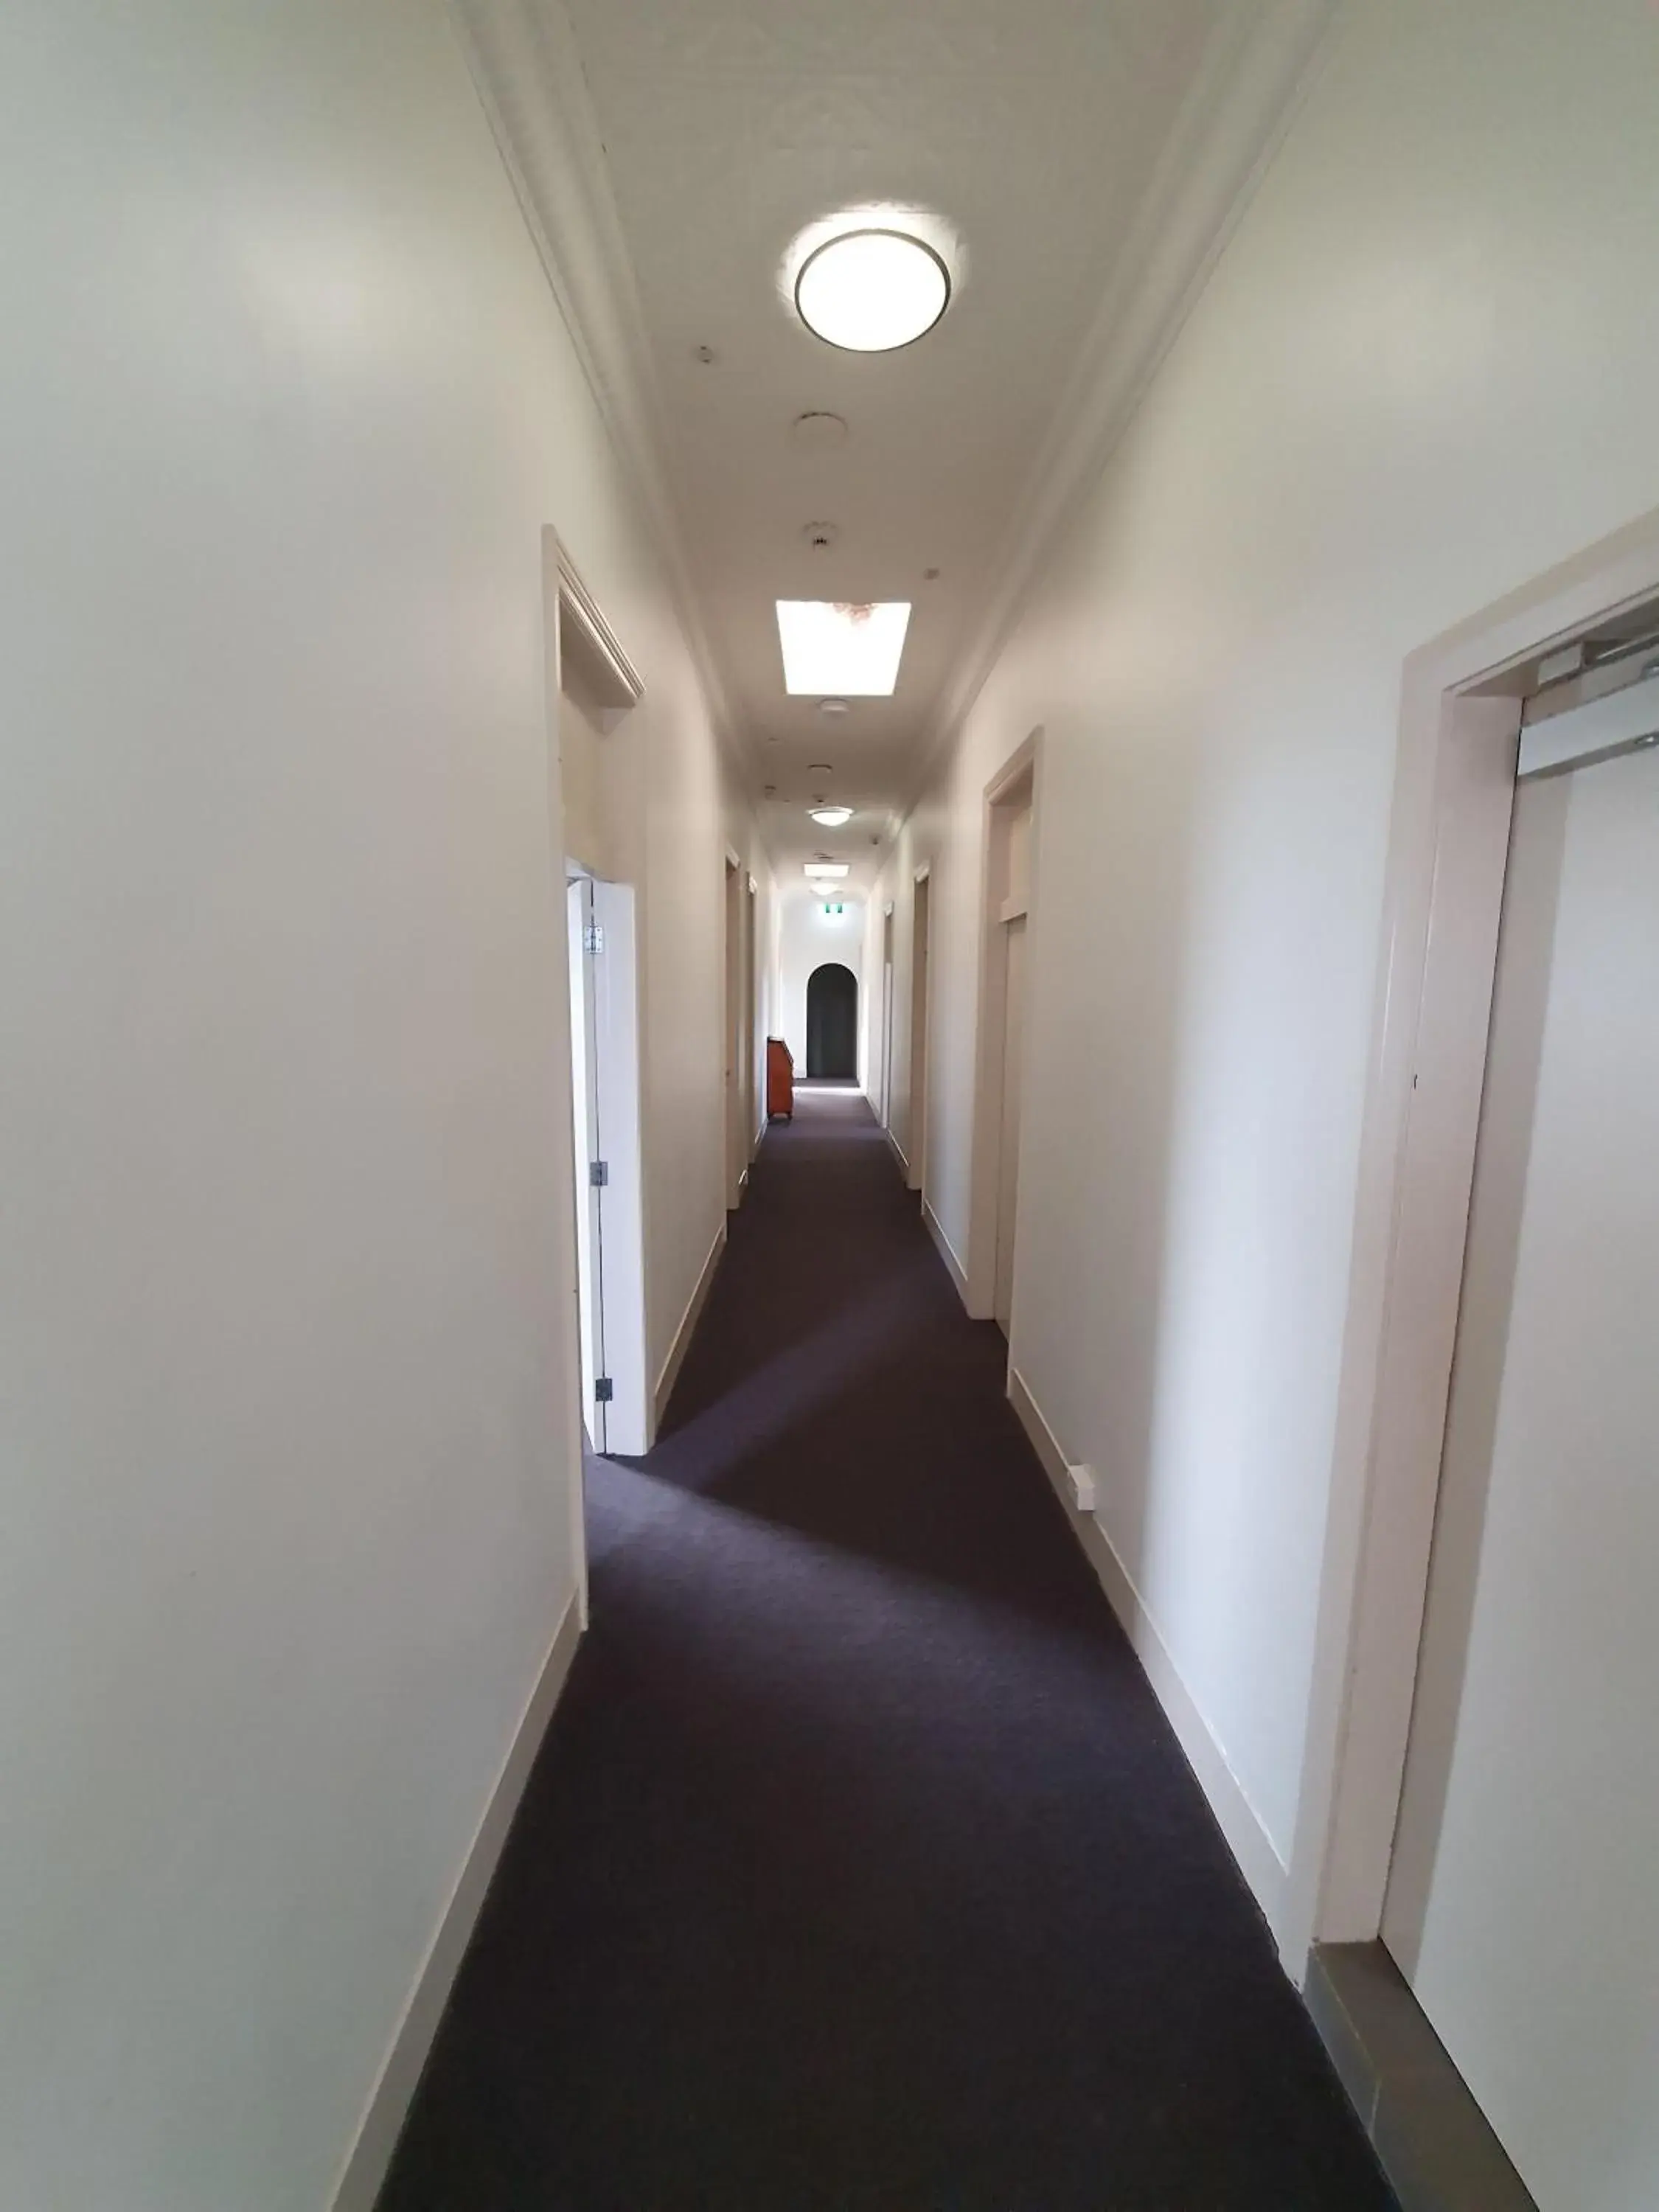 Area and facilities in Empire Hotel Goulburn